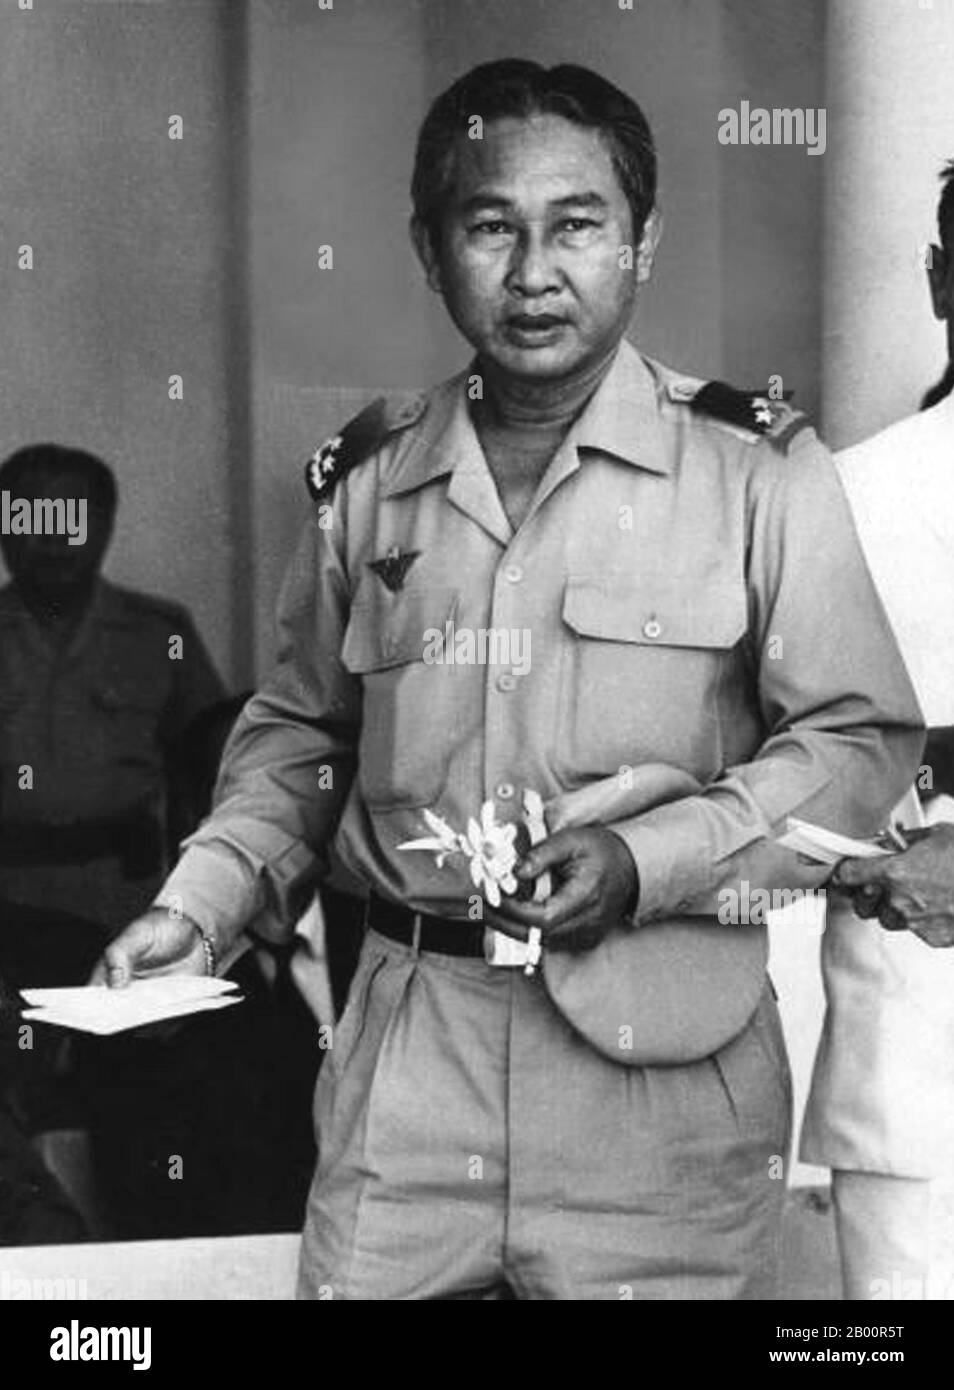 Cambodia: General Lon Nol led a military coup against Prince Norodom Sihanouk and became President of the Khmer Republic (1970-1975).  Lon Nol (November 13, 1913 – November 17, 1985) was a Cambodian politician and soldier  who served as Prime Minister of Cambodia twice, as well as serving repeatedly as Defense Minister. He led a military coup against Prince Norodom Sihanouk and became President of the Khmer Republic. Lon Nol fled Cambodia in April, 1975, first settling in Hawaii and then in Fullerton, California. He died on November 17, 1985. Stock Photo